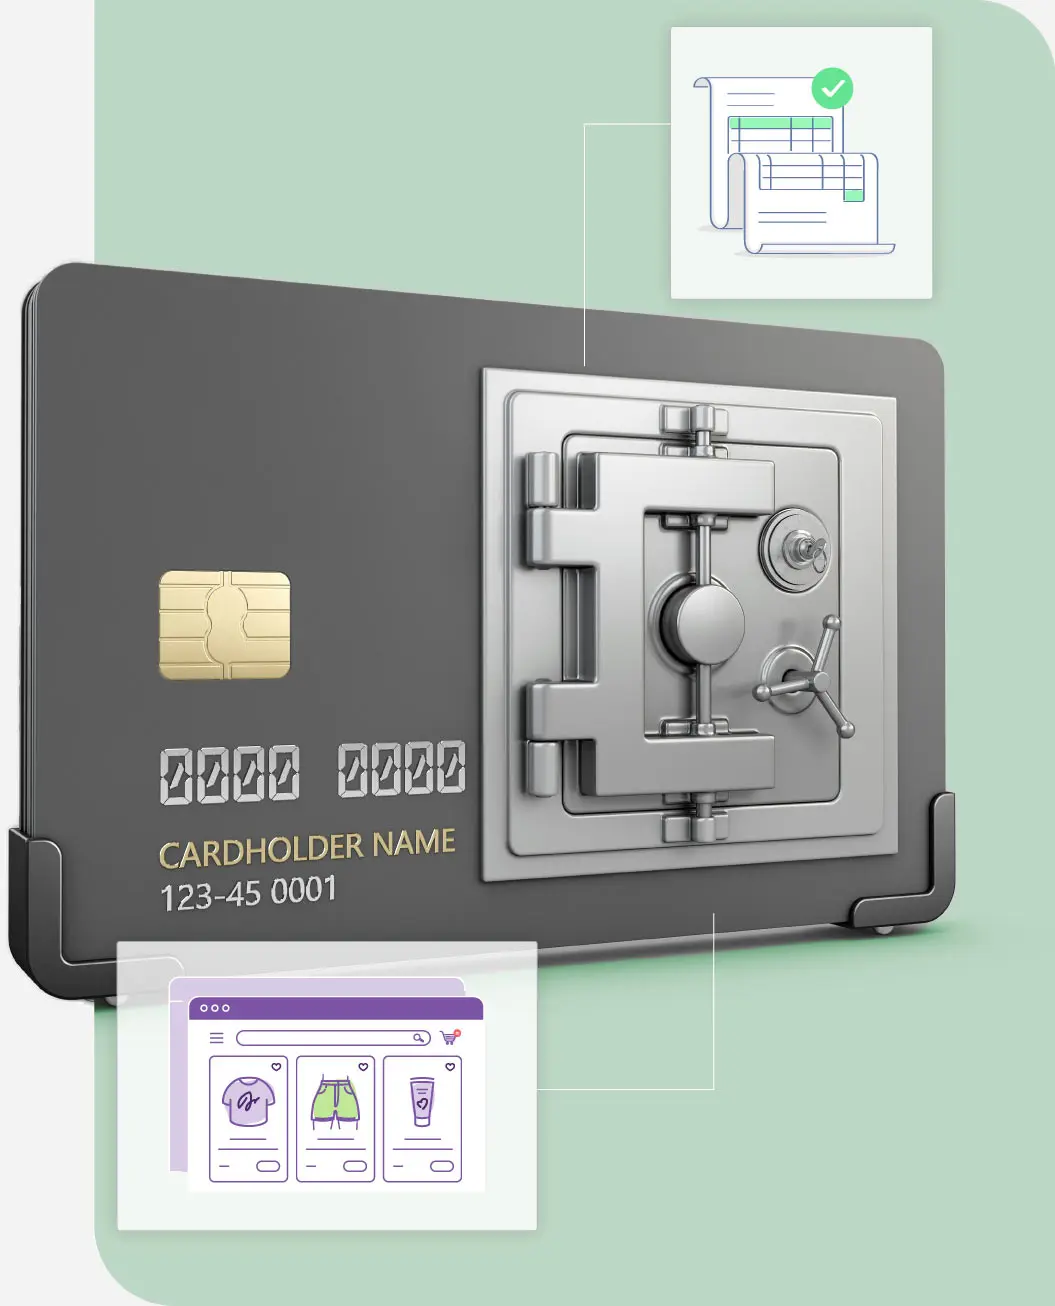 Illustration of a payment card and the front of a vault, meant to symbolize fraud prevention